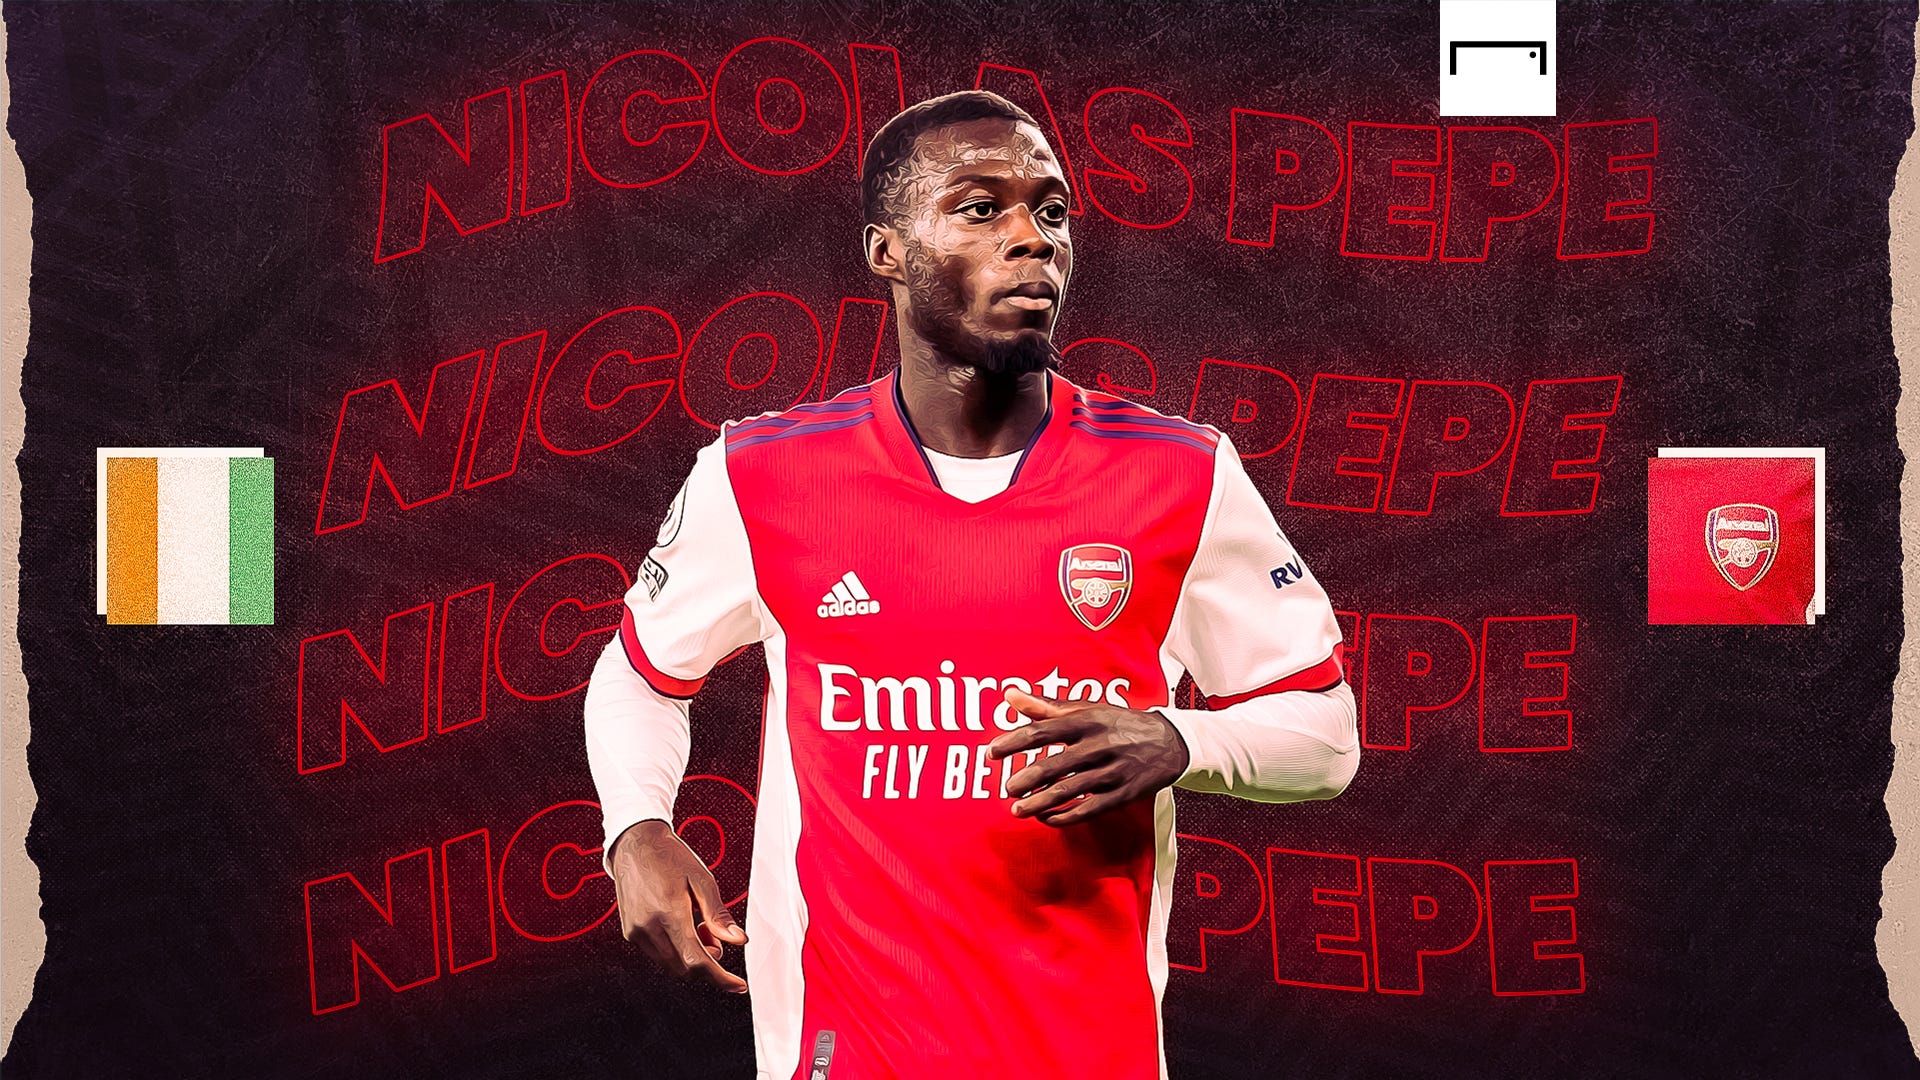 Nicolas Pepe - What does the future hold?